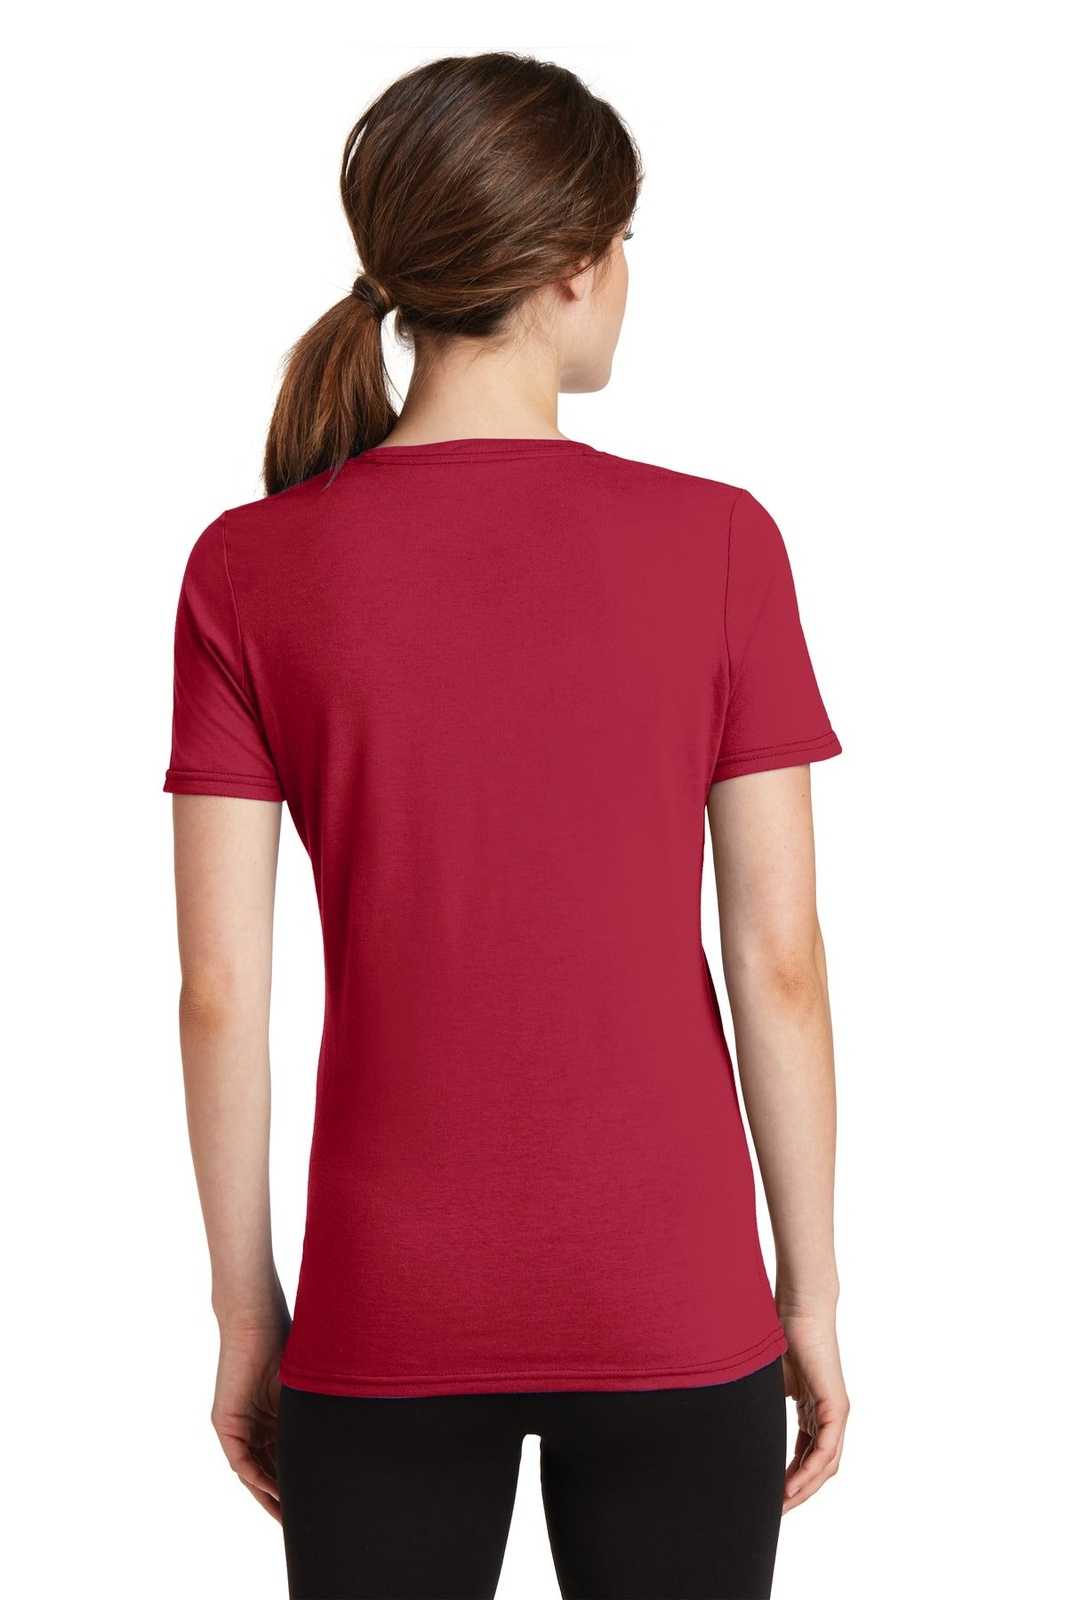 Port & Company LPC381V Ladies Performance Blend V-Neck Tee - Red - HIT a Double - 1